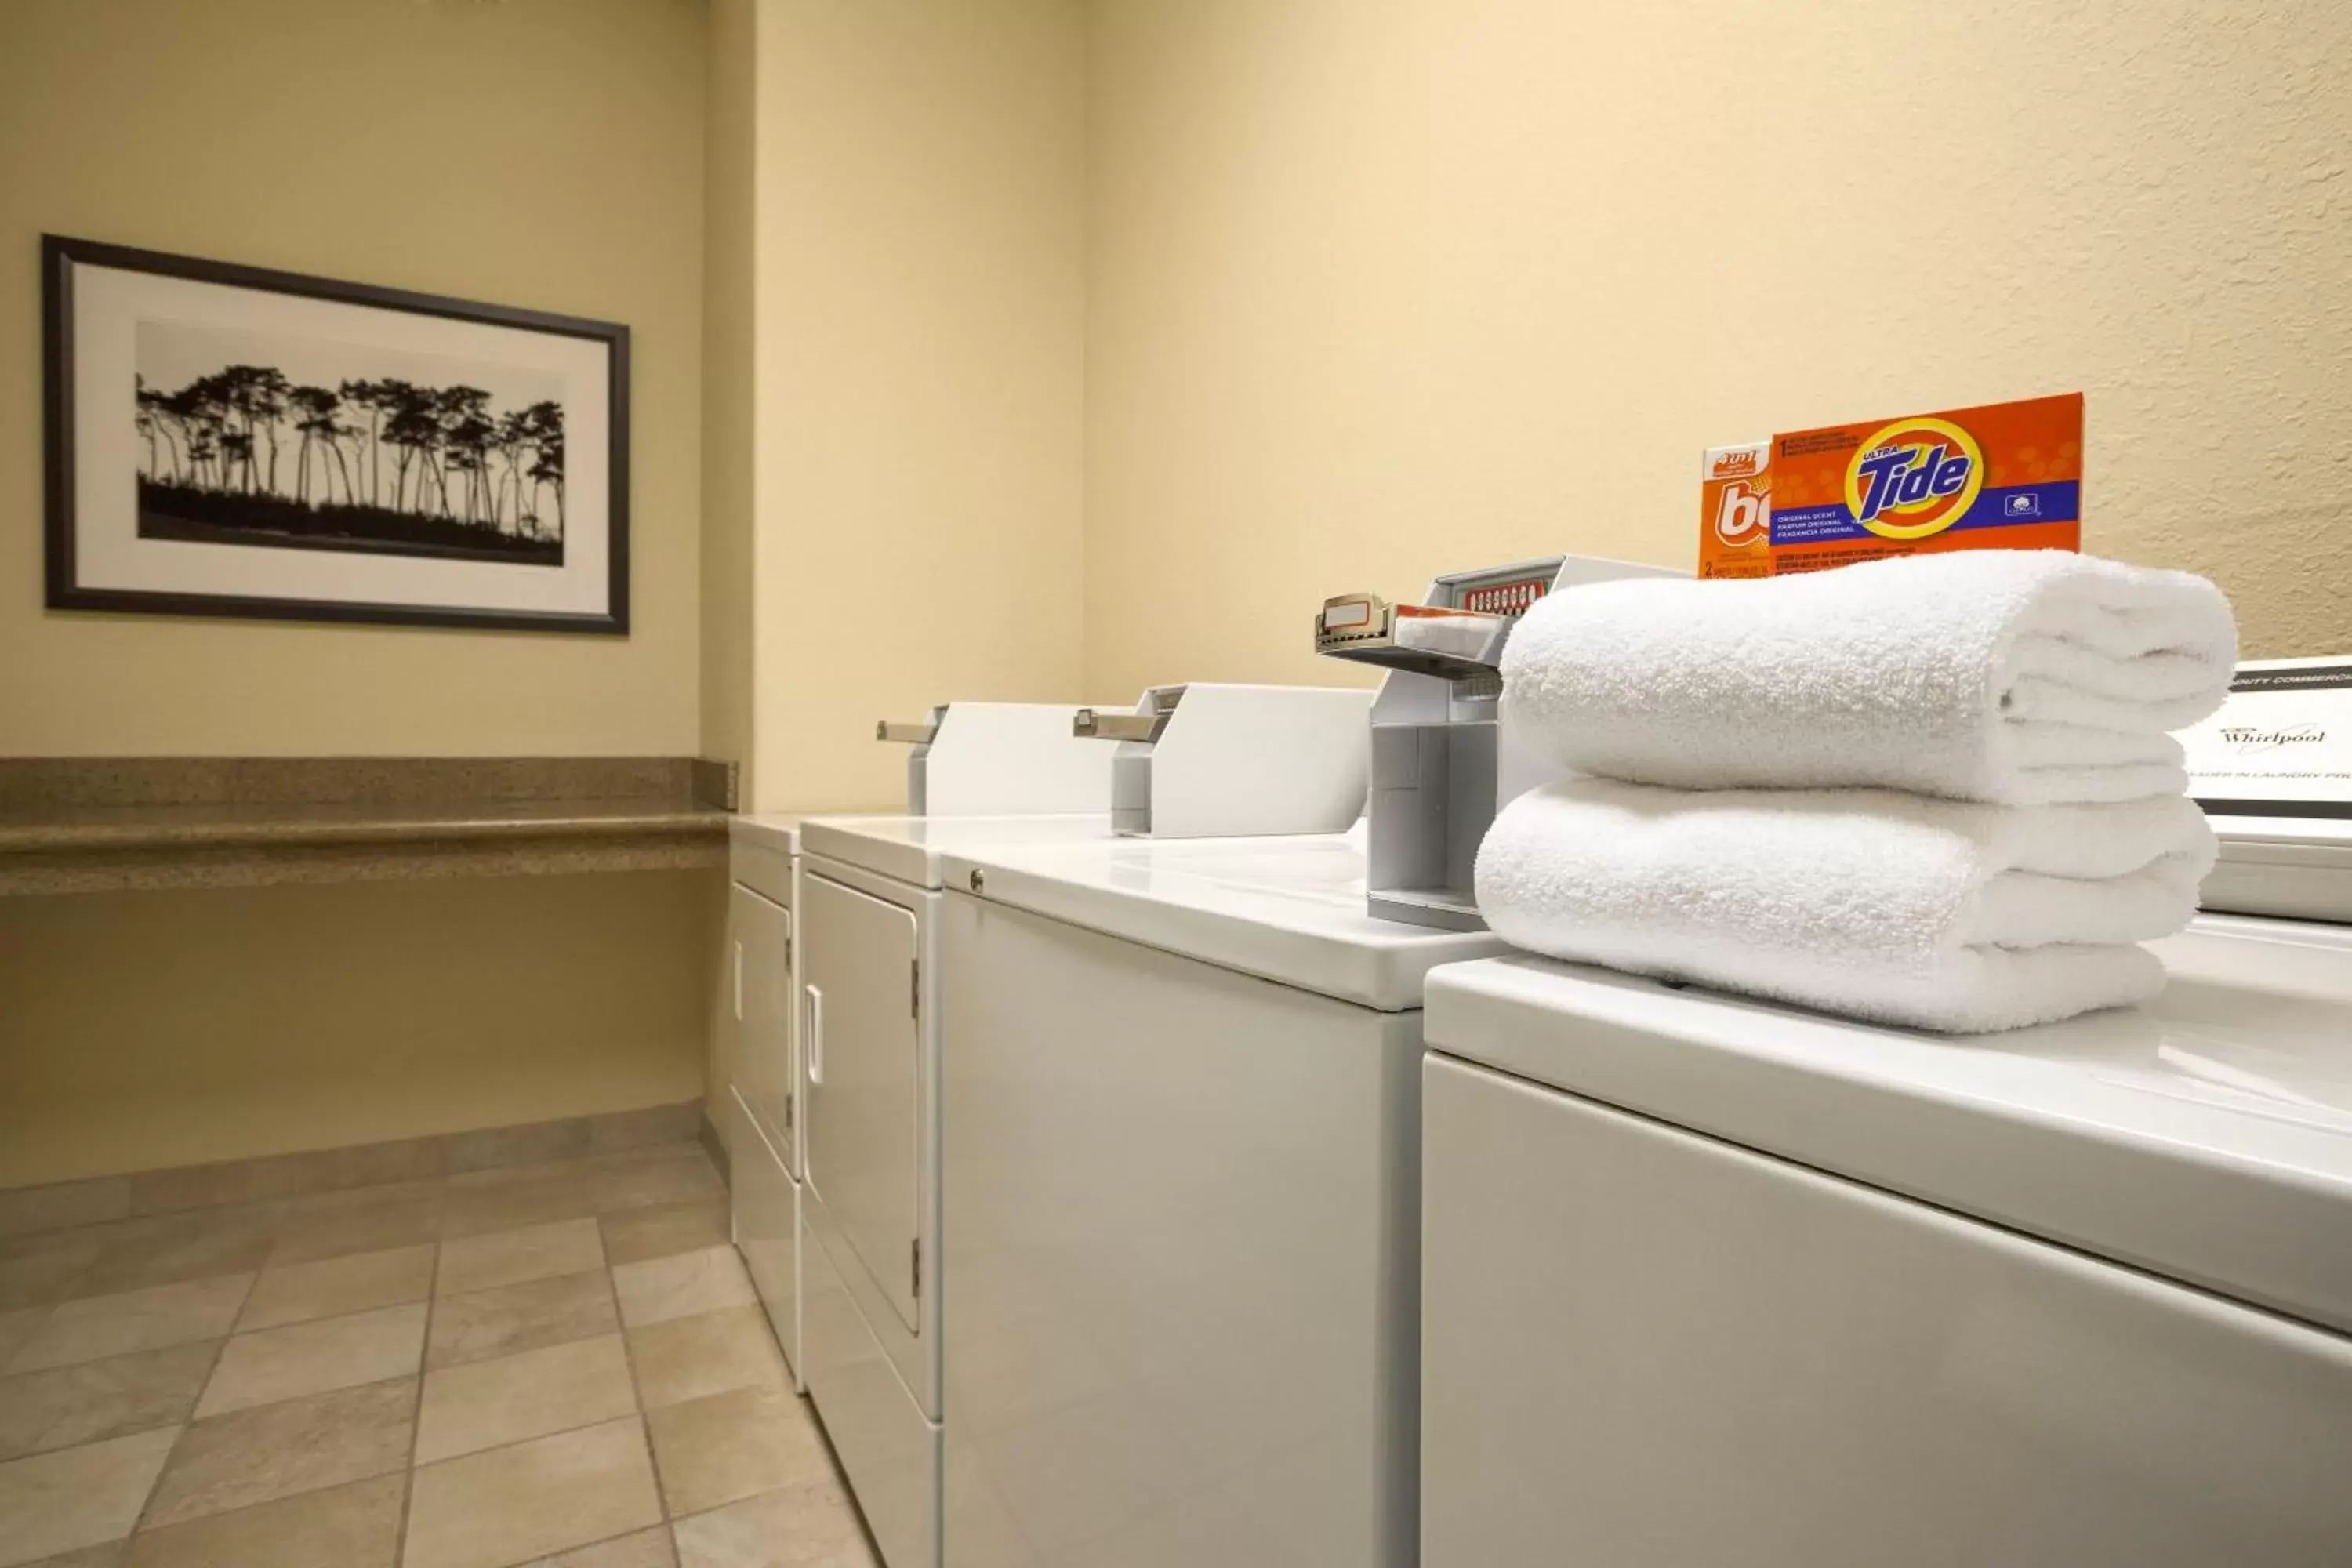 Area and facilities in Country Inn & Suites by Radisson, Green Bay East, WI